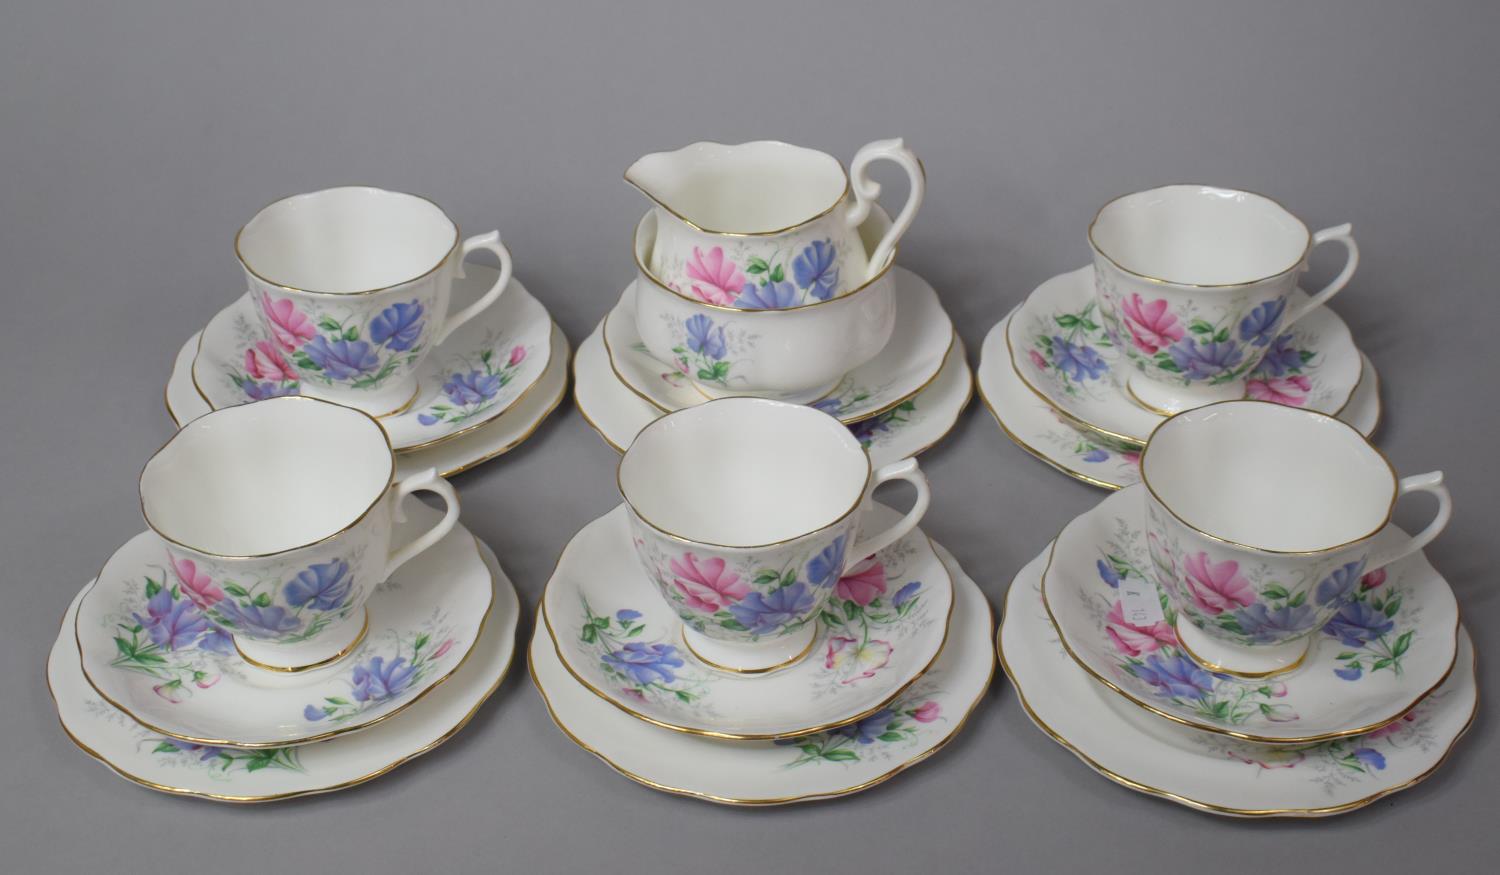 A Royal Albert Friendship Series of Twelve Sweet Pea Pattern Teaset to comprise Five Cups, Six